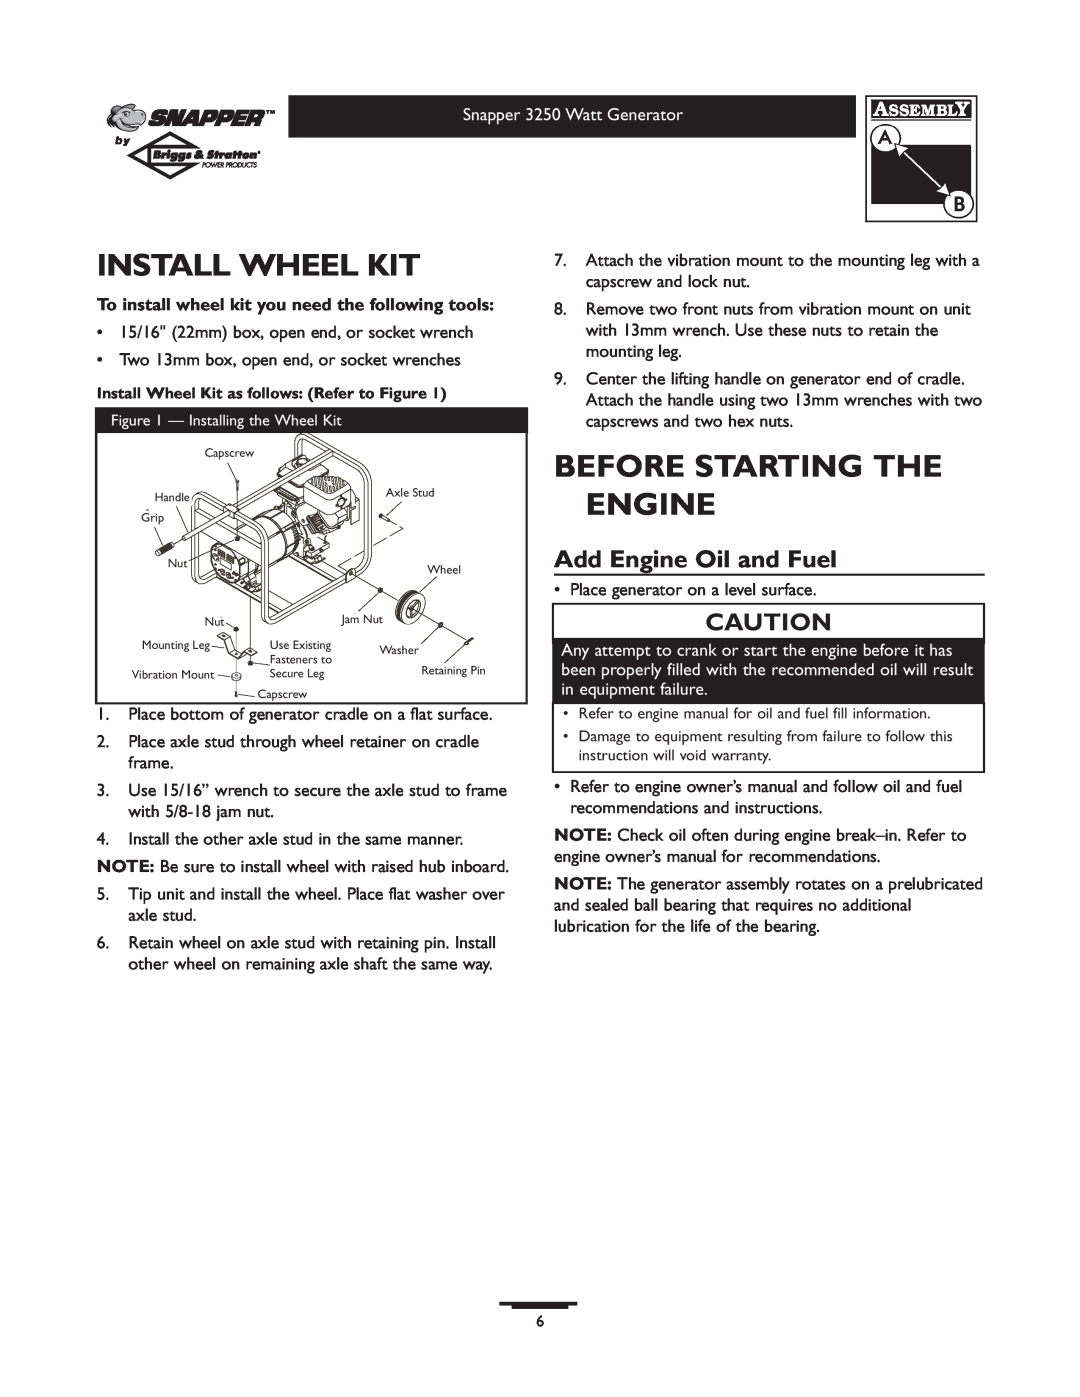 Snapper 1667-0 Install Wheel Kit, Before Starting The Engine, Add Engine Oil and Fuel, Snapper 3250 Watt Generator 